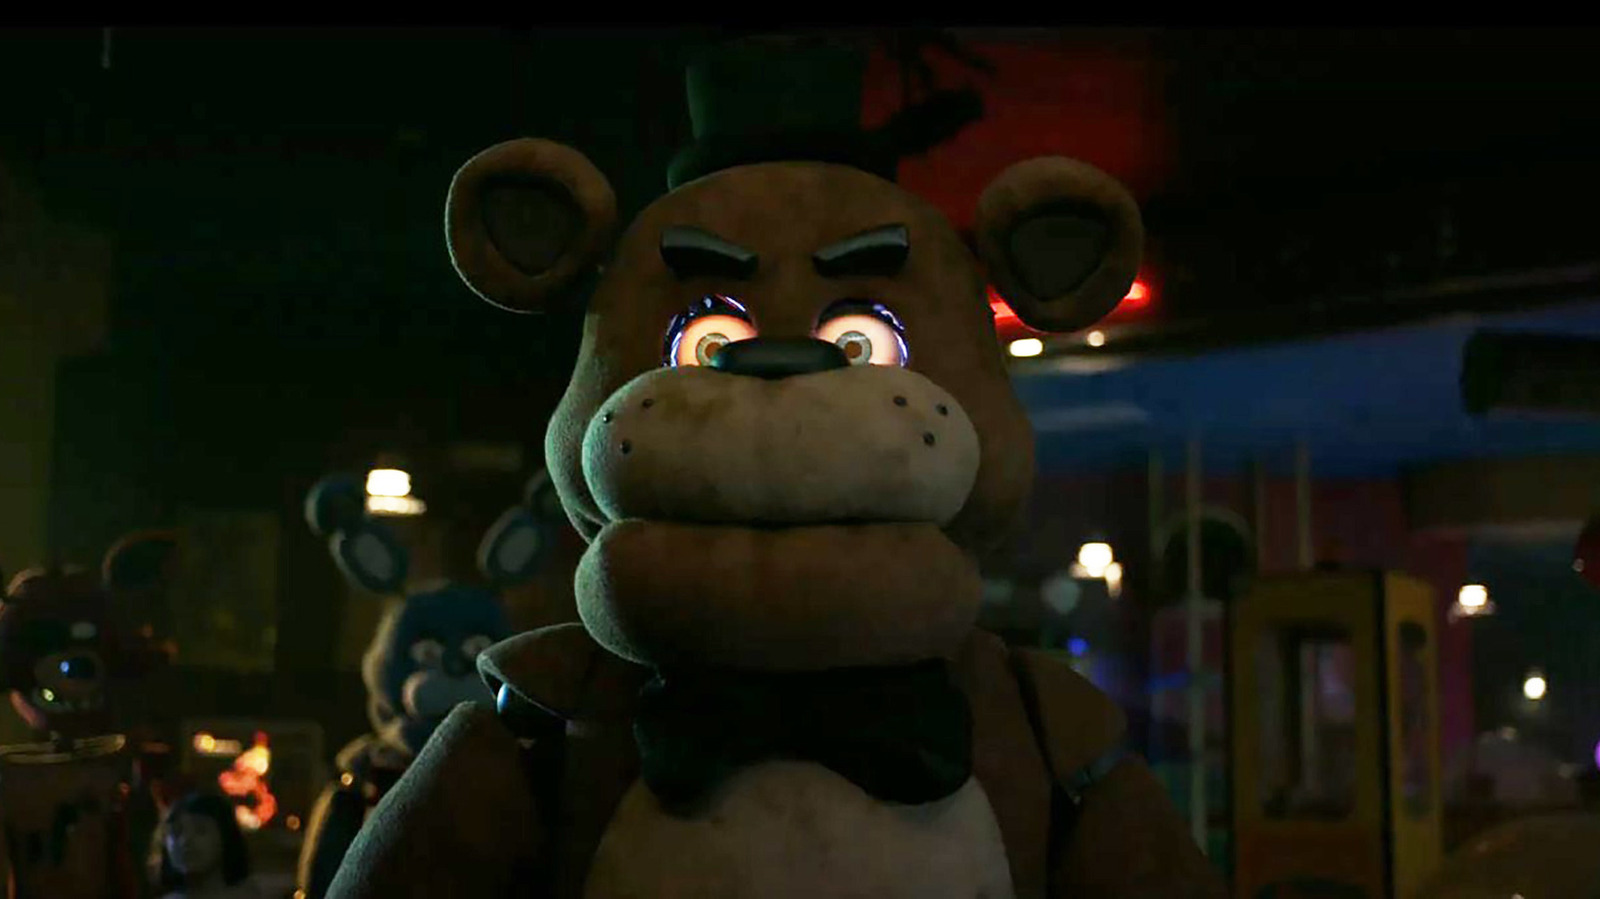 What is the least liked animatronic in FNAF? I'd put money on